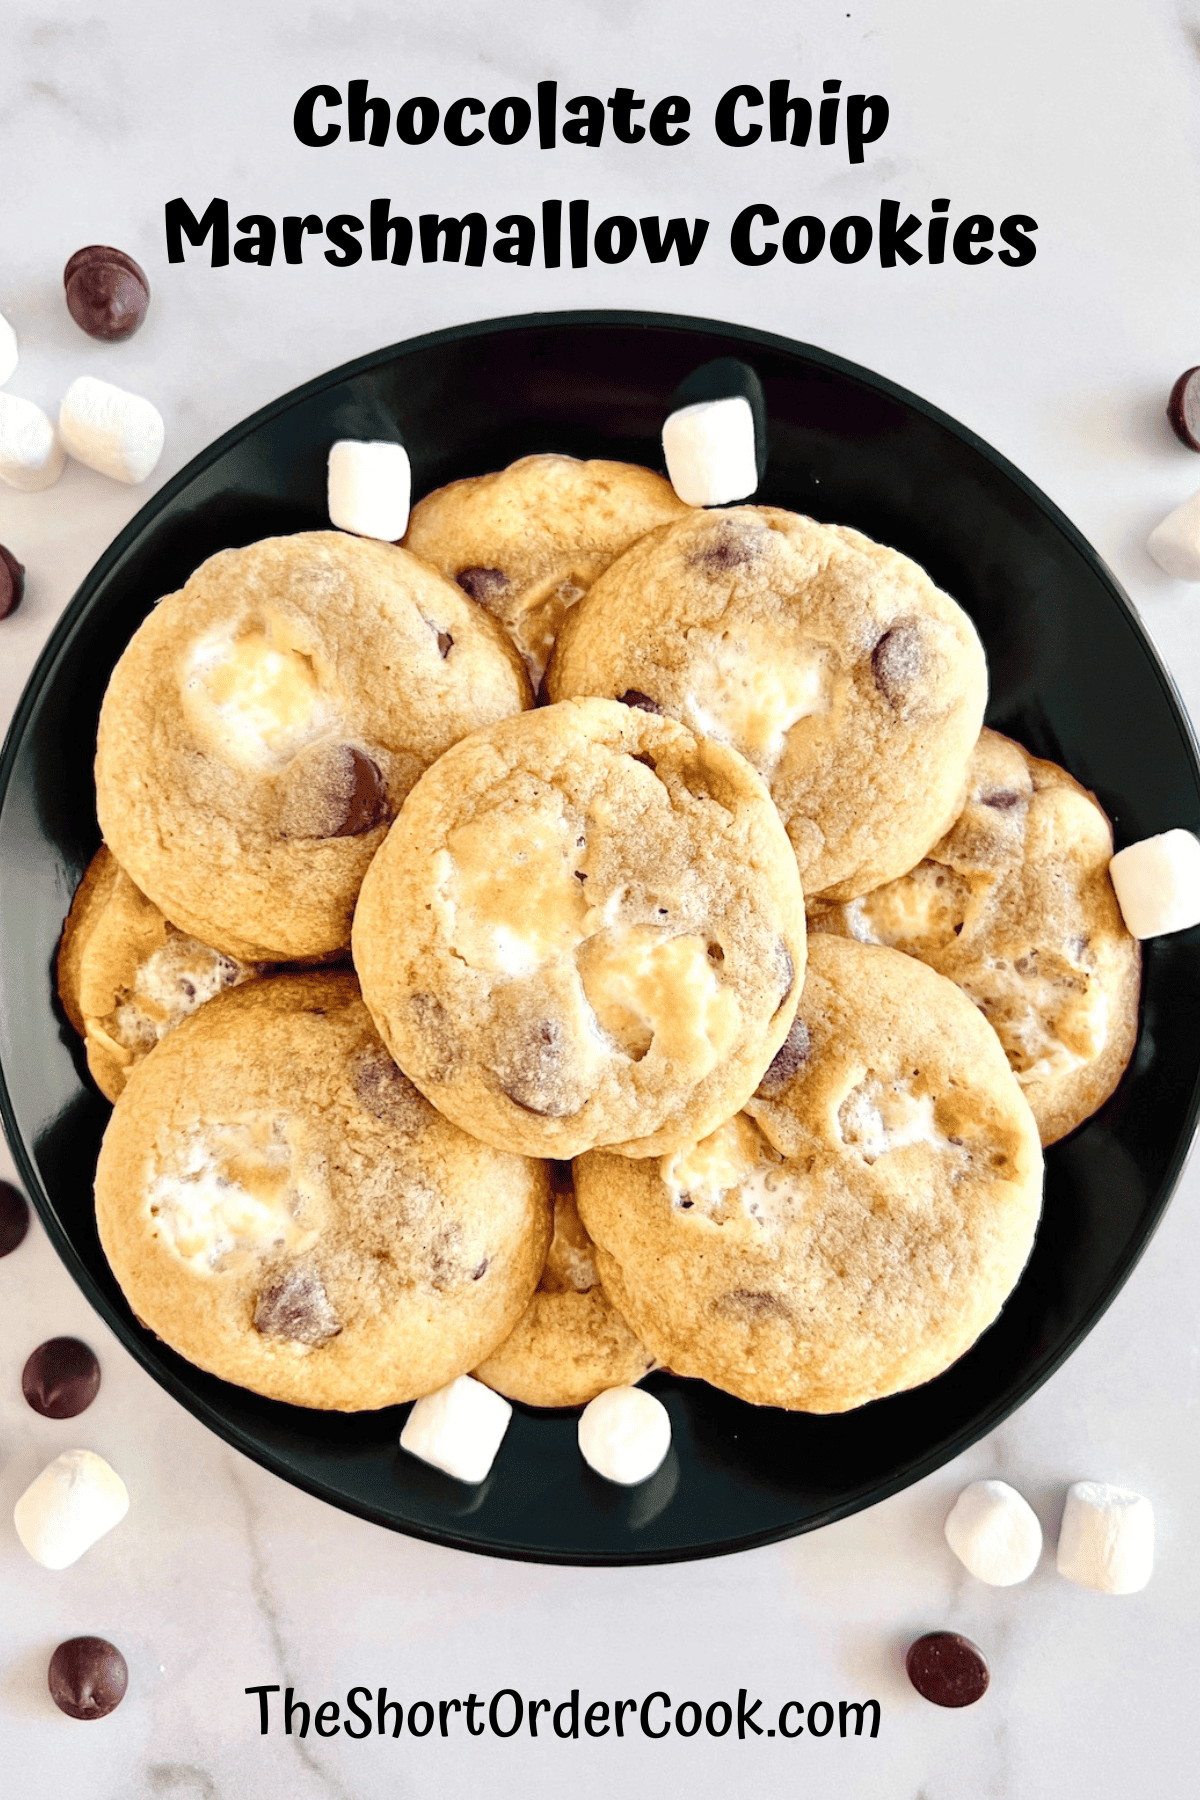 Chocolate Chip Cookies with mini Marshmallows stacked on a black plate ready to eat.